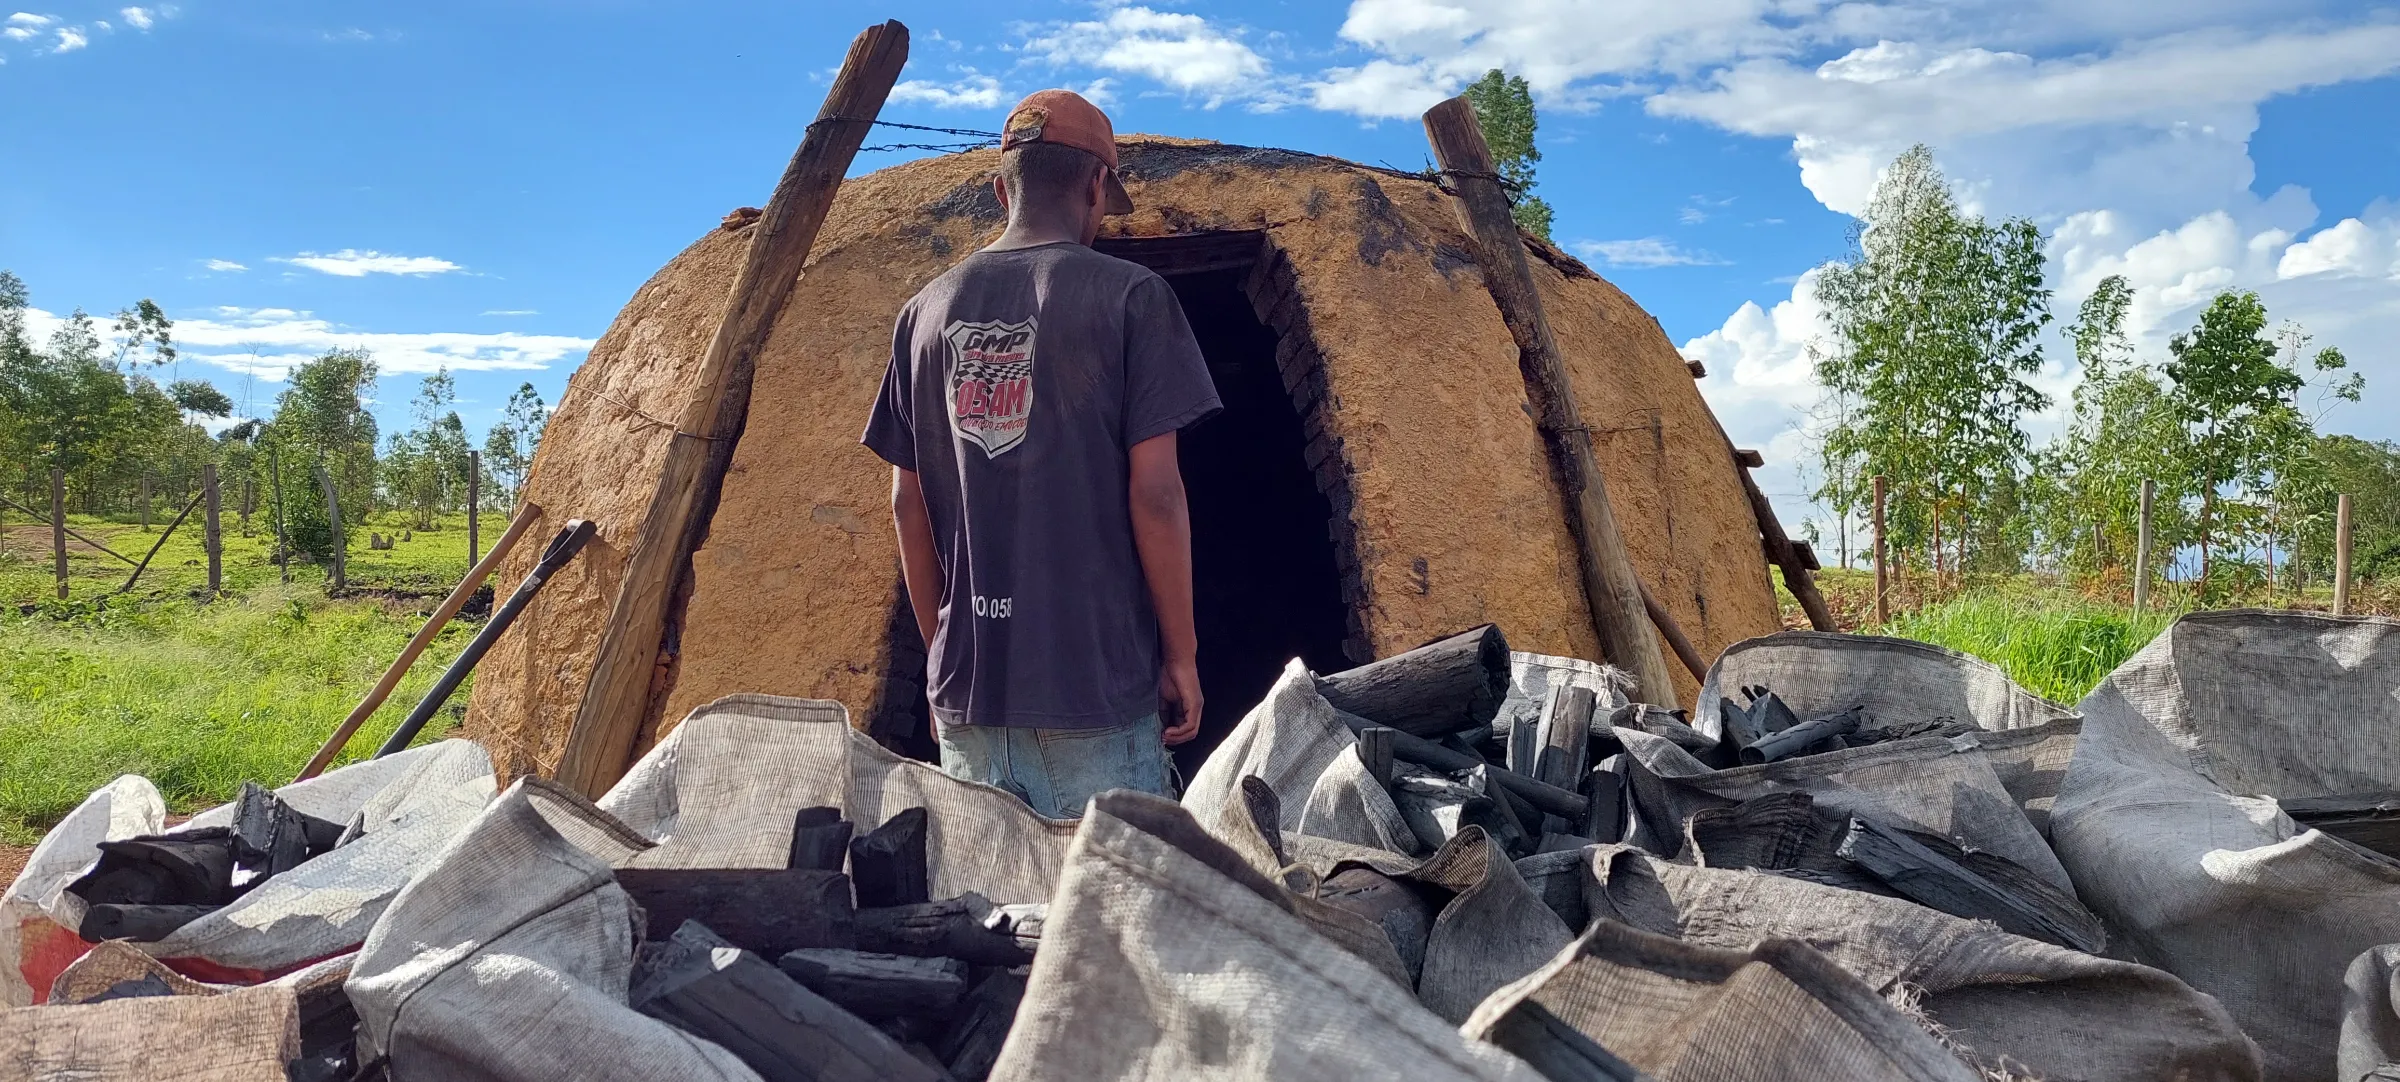 A man stands in front of a kiln behind bags of charcoal